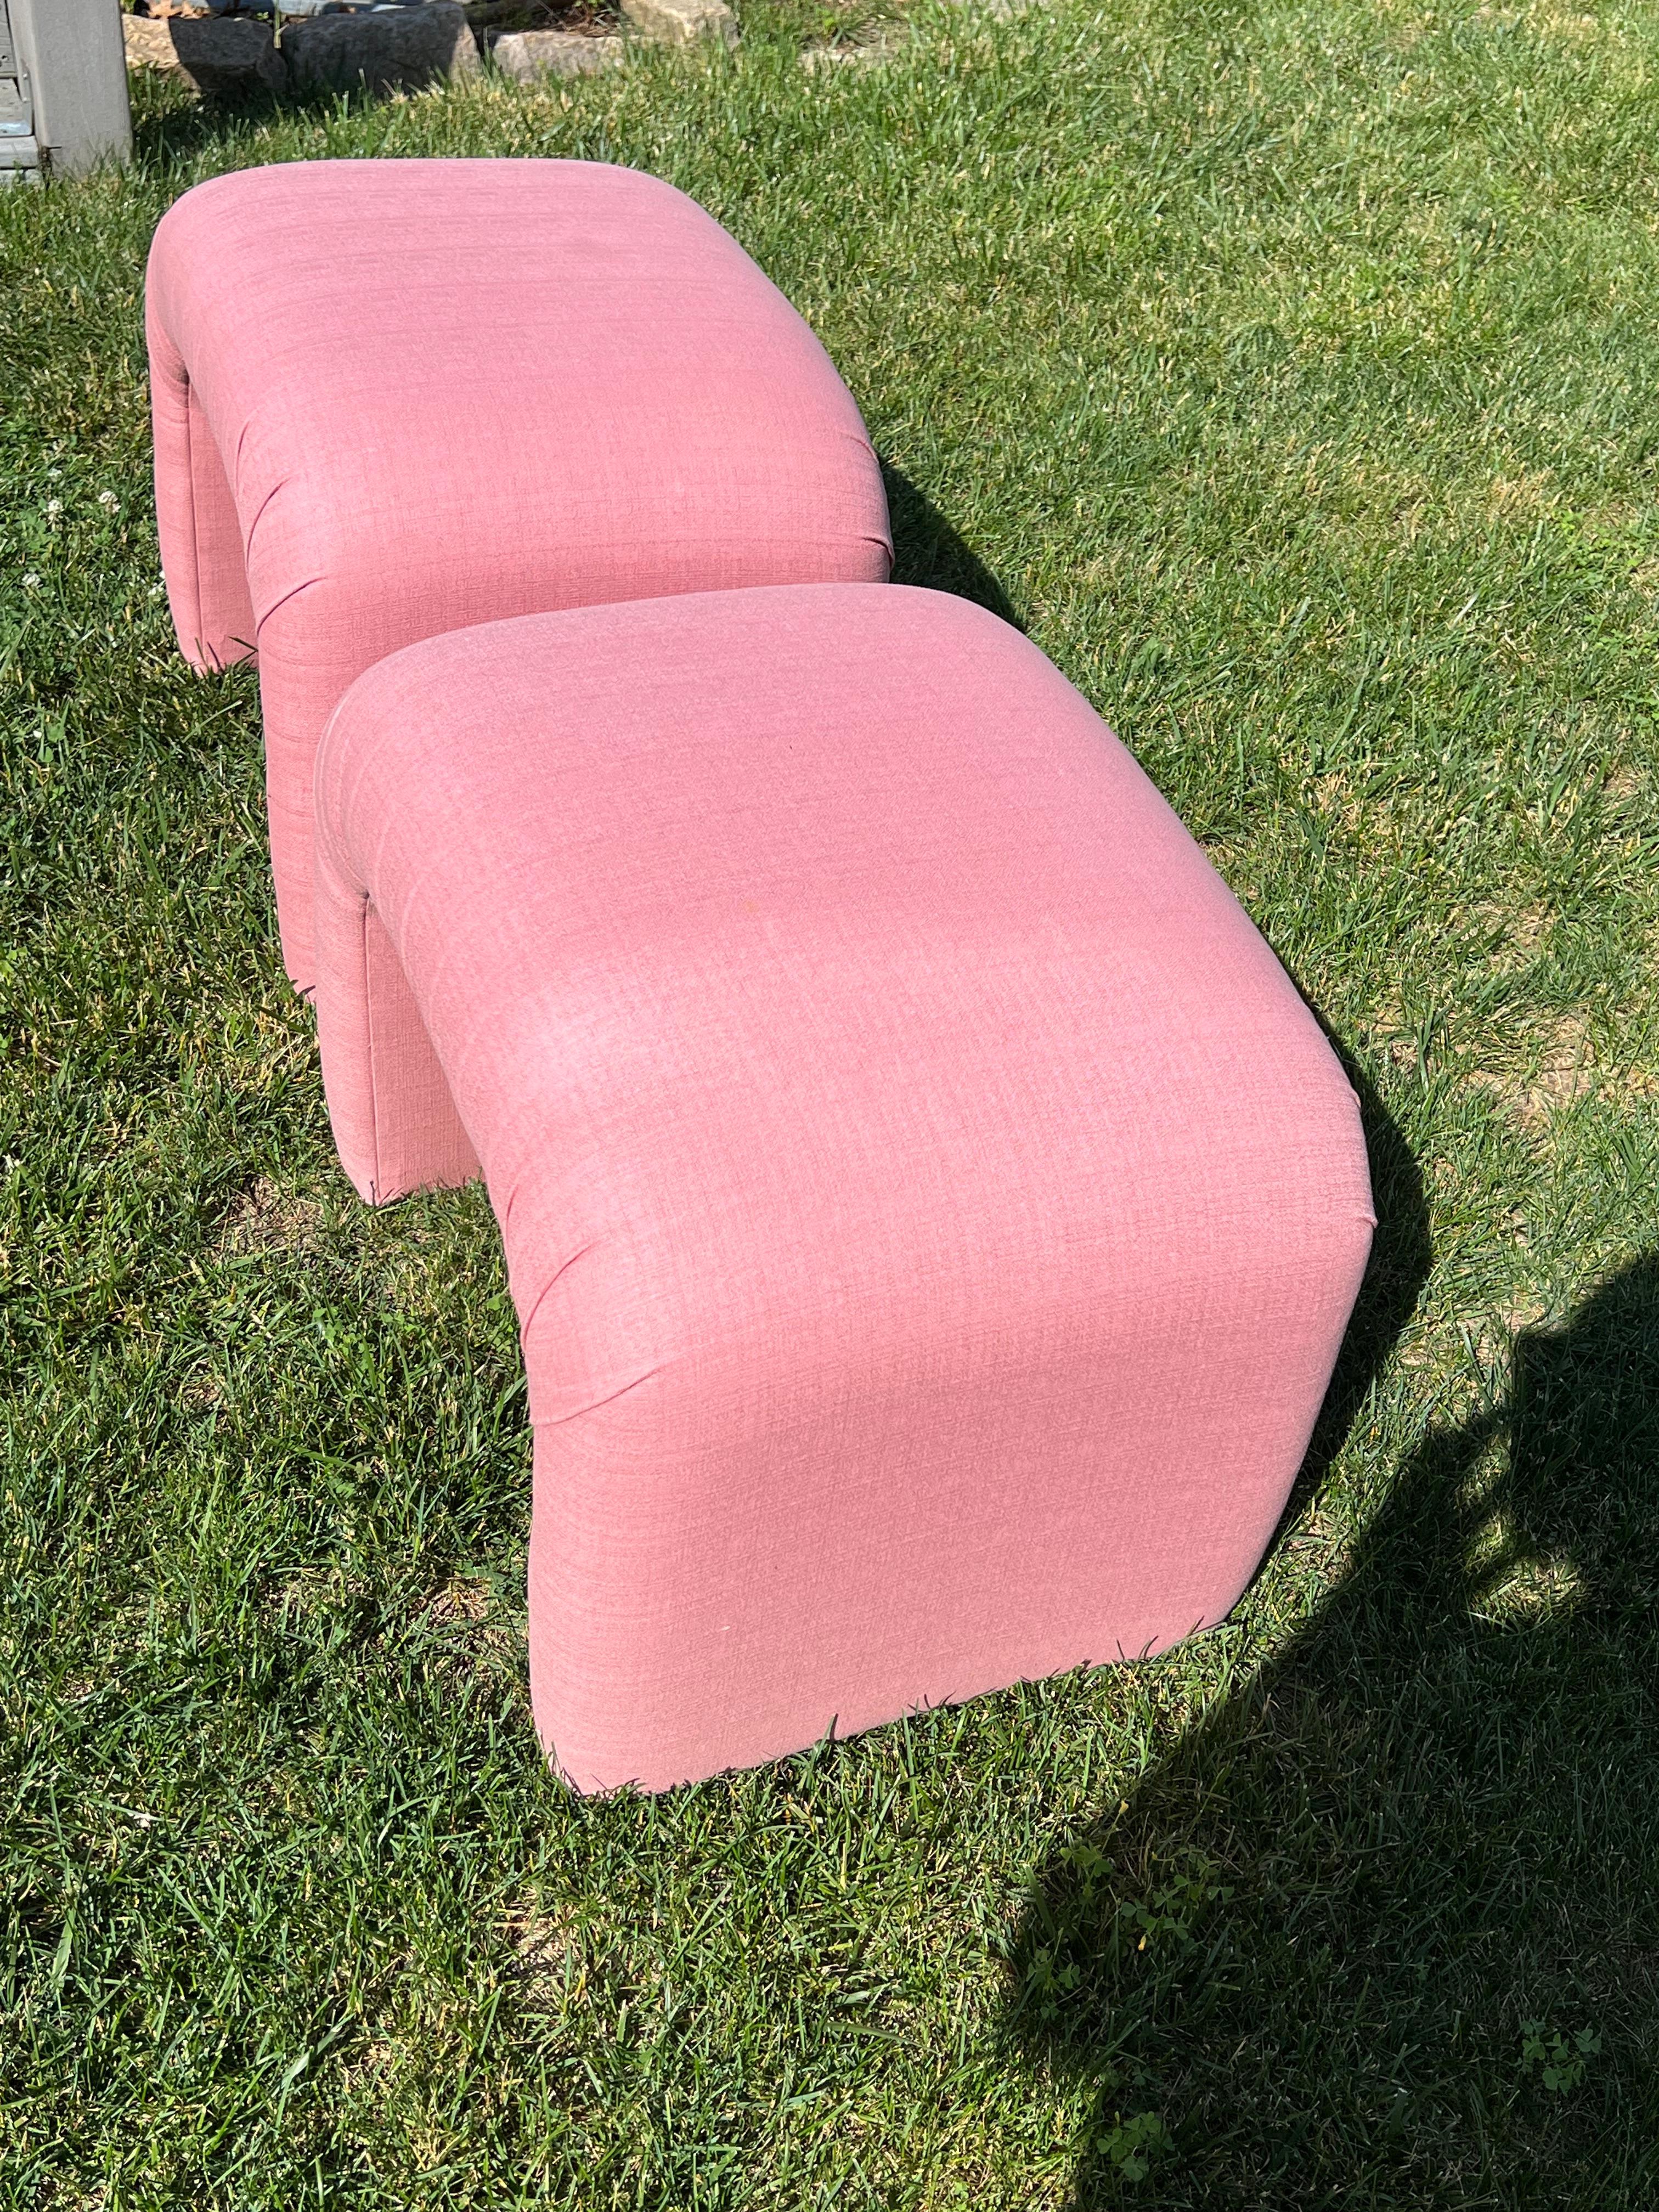 Post-Modern Postmodern Pink Waterfall Stools - a Pair For Sale